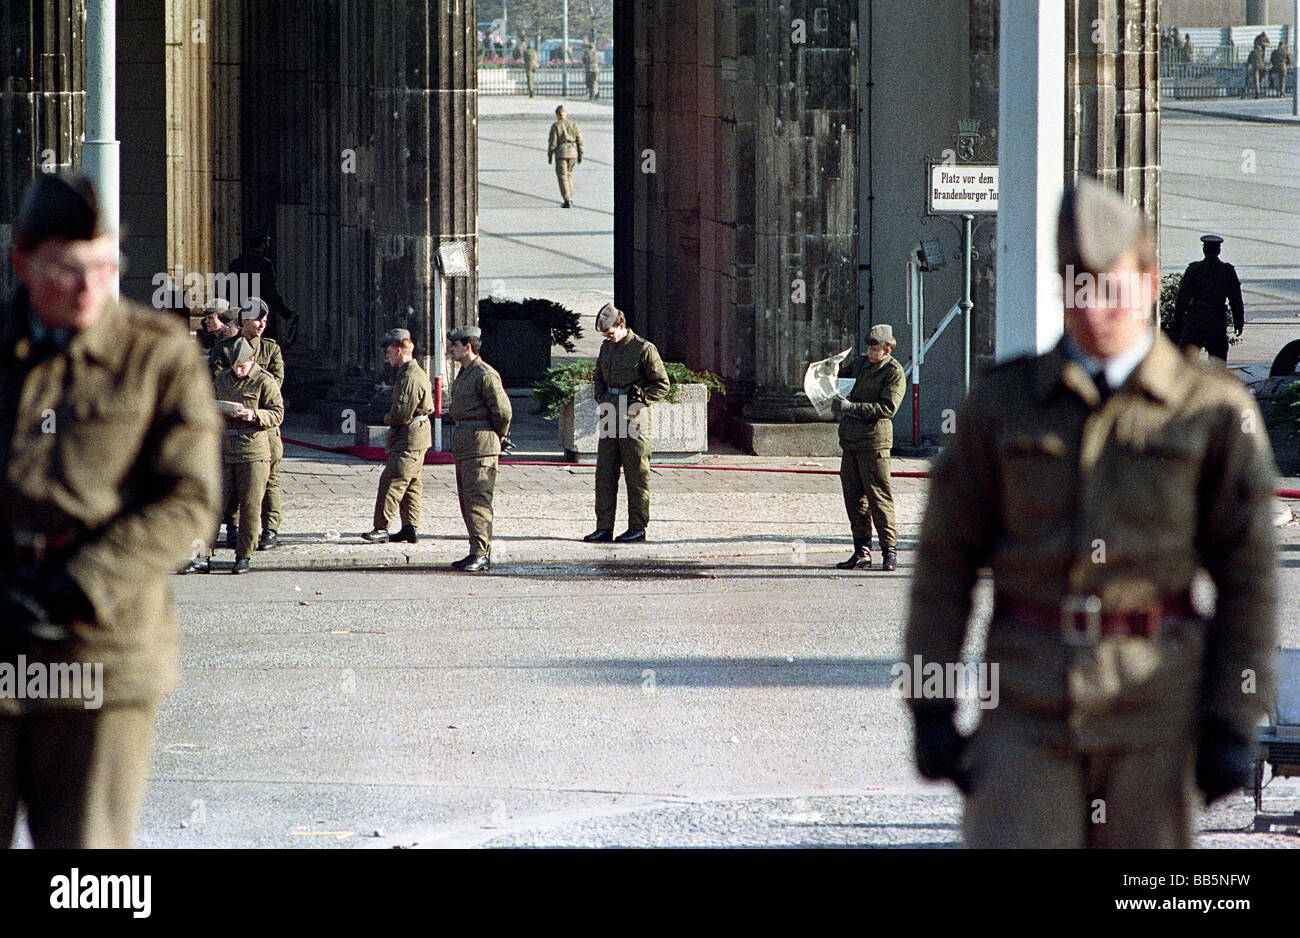 NVA soldiers in front of the Brandenburg Gate in 1989, Berlin, Germany Stock Photo